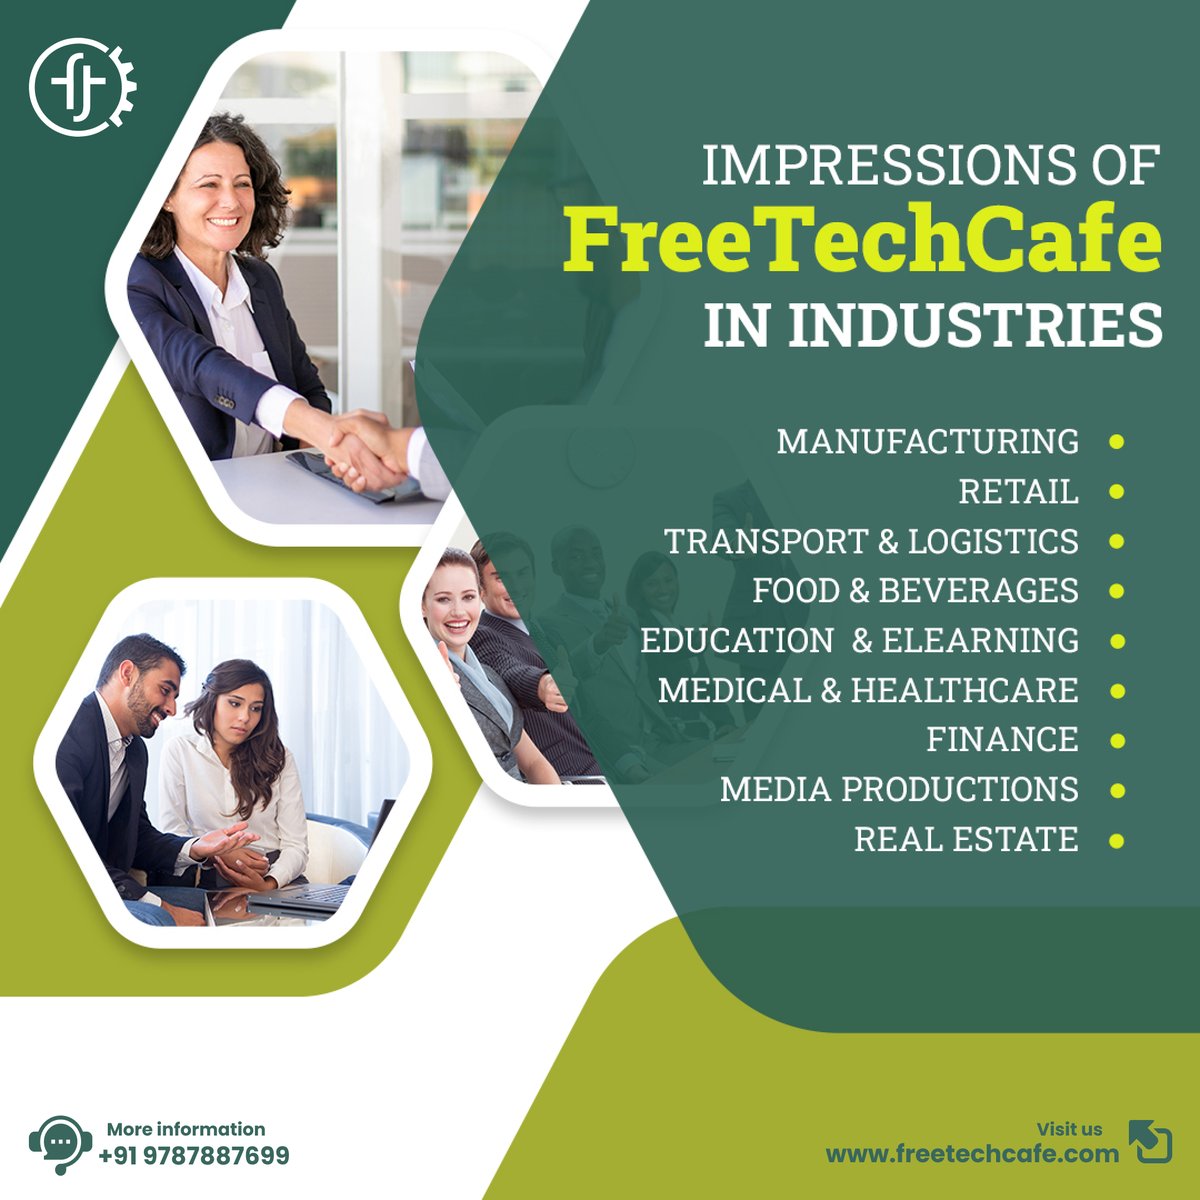 FreeTechCafe deliver the best IT Solutions for all Industries with our Experts!

#freetechcafe #technology #techlife #startuplife #softwaredevelopment #outsourcingindia #outsourcingprojects #businessautomation #iot #ai #ml #bigdata